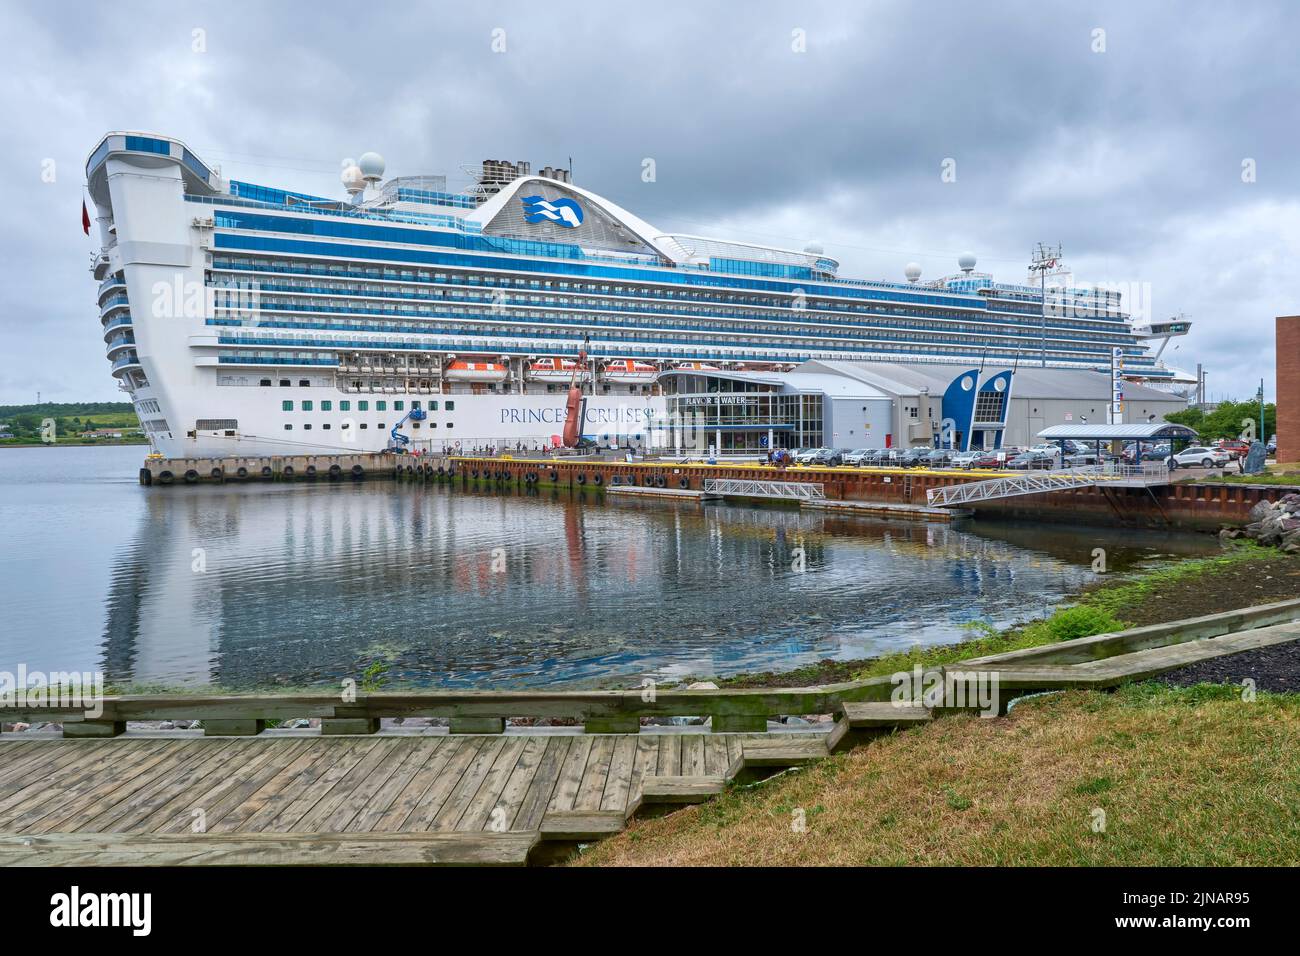 Caribbean Princess during it's Port of Call in Sydney Nova Scotia on August 10, 2022.  The ship is owned by Princess Cruises and has a capacity of ove Stock Photo